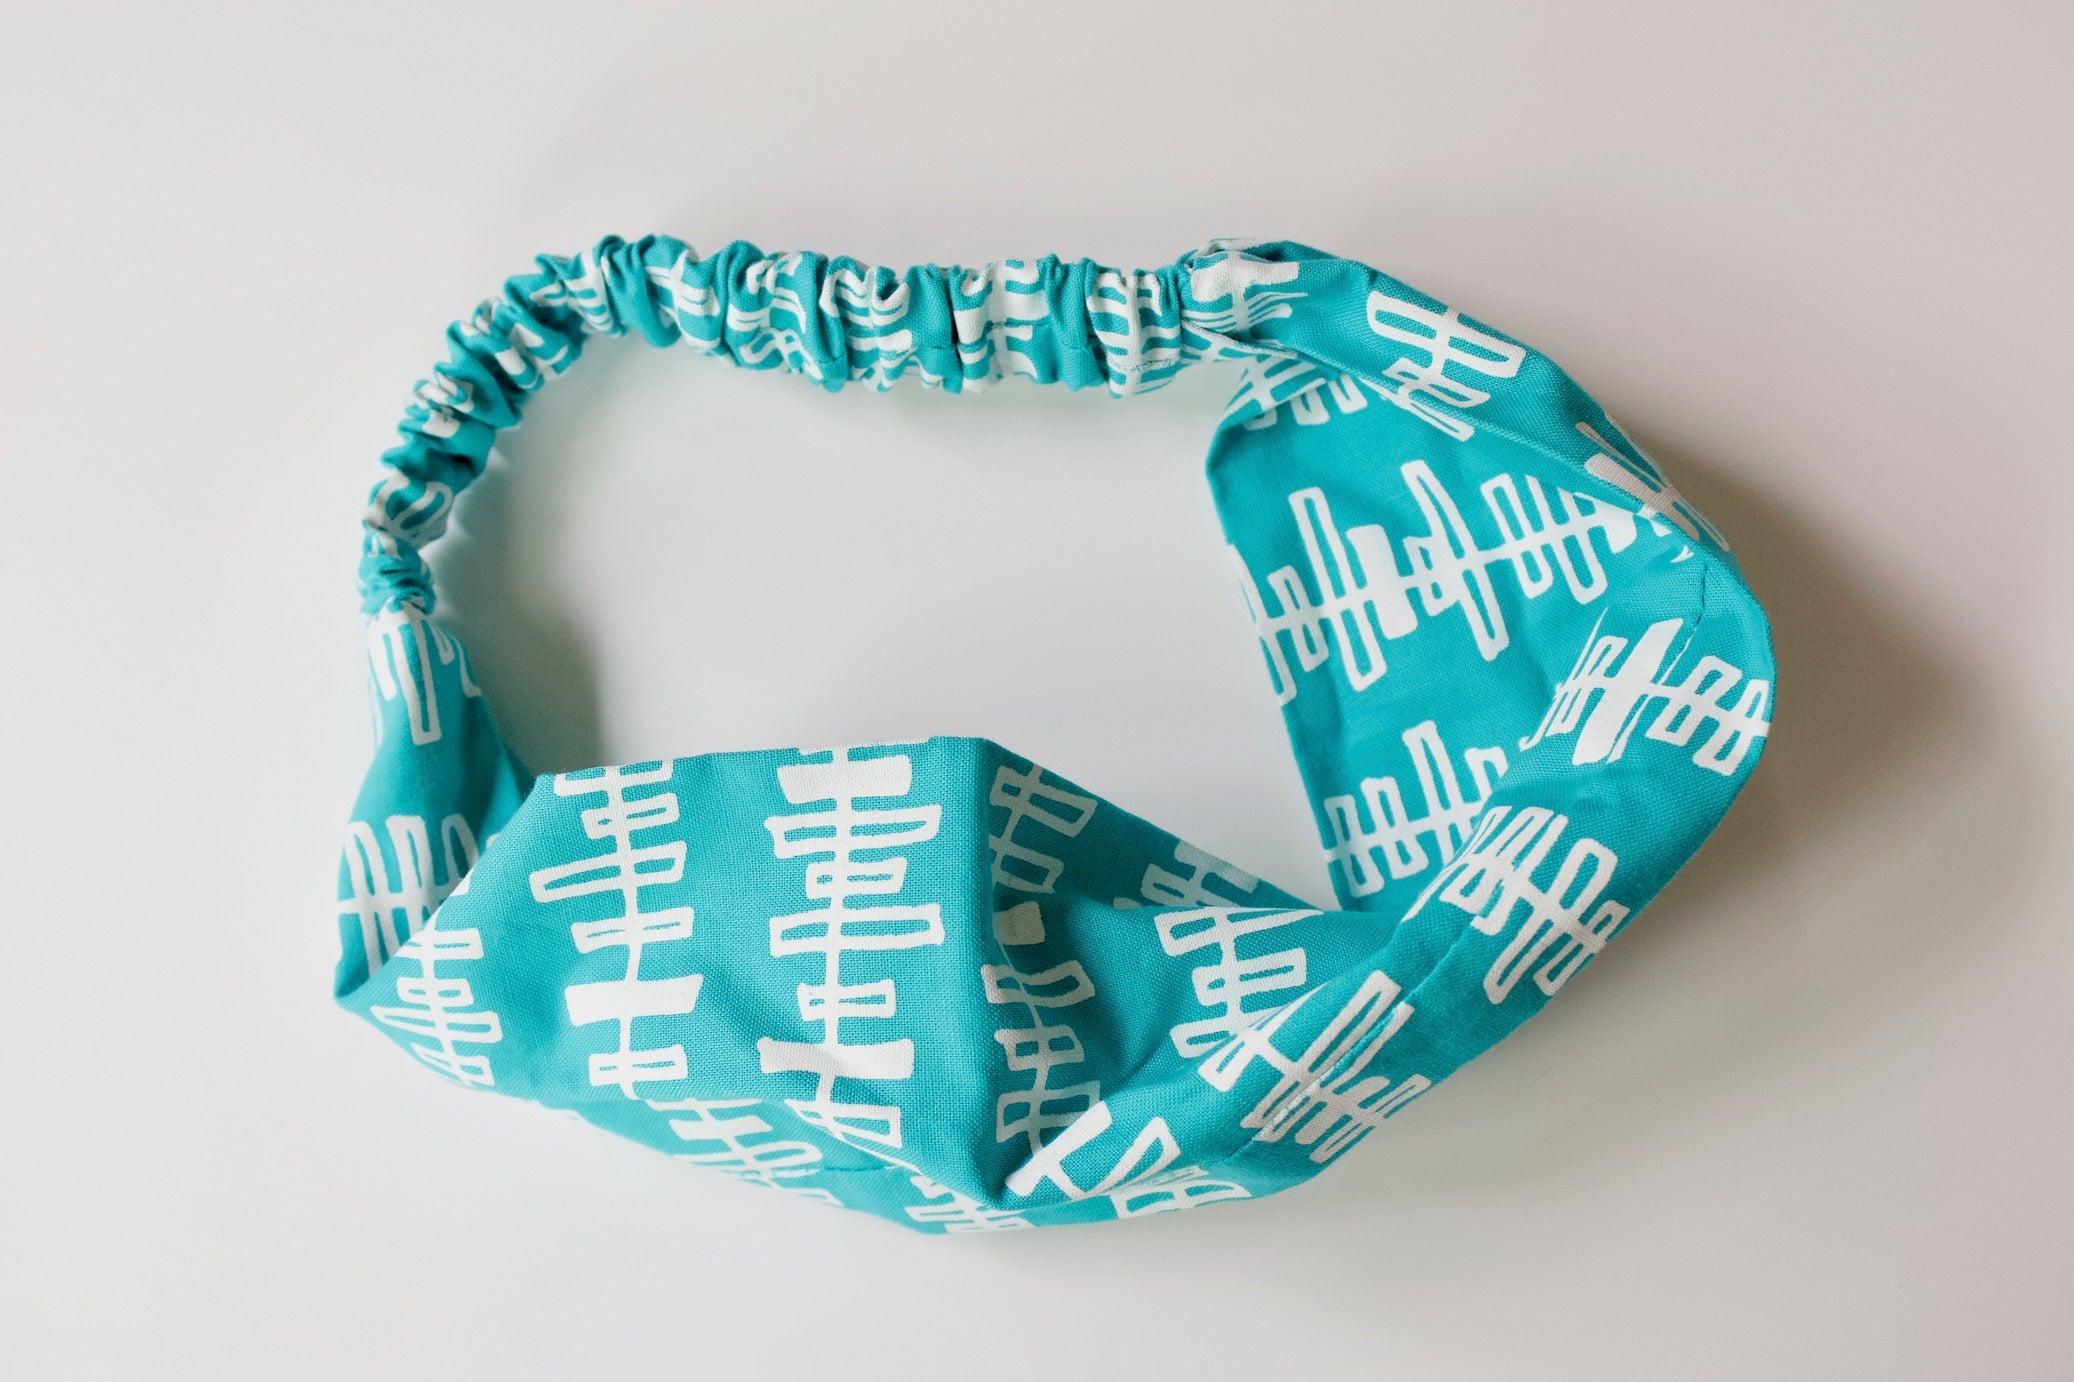 Teal Chords Twist Headband-The Blue Peony-Category_Headband,Color_Teal,Color_White,Department_Personal Accessory,Style_Twist